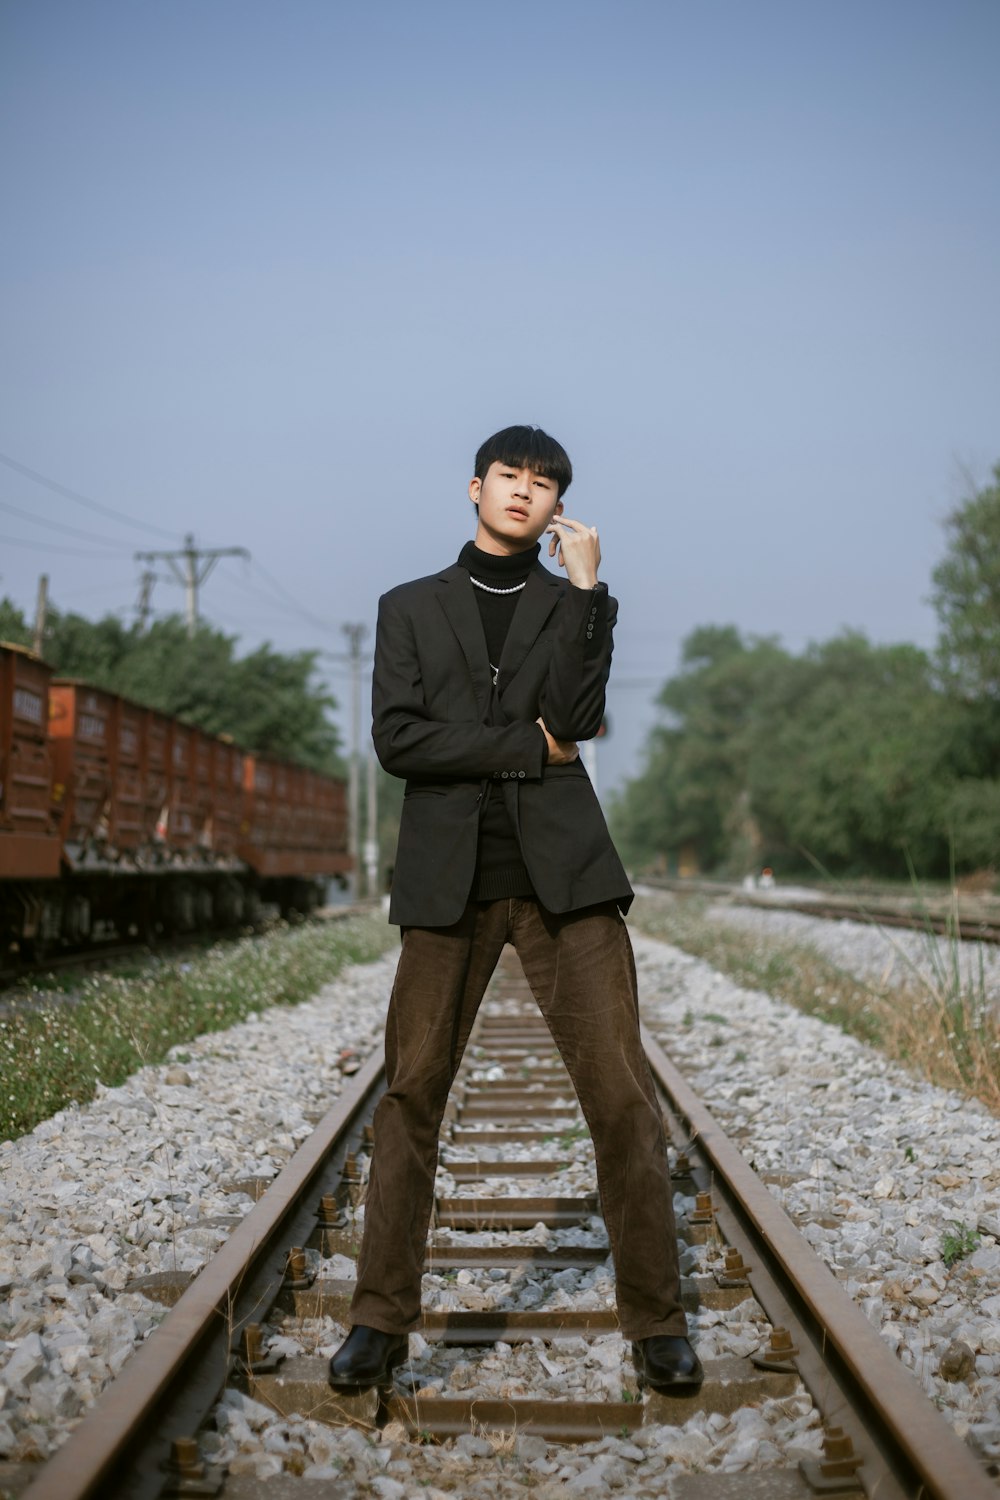 a man standing on a train track next to a train